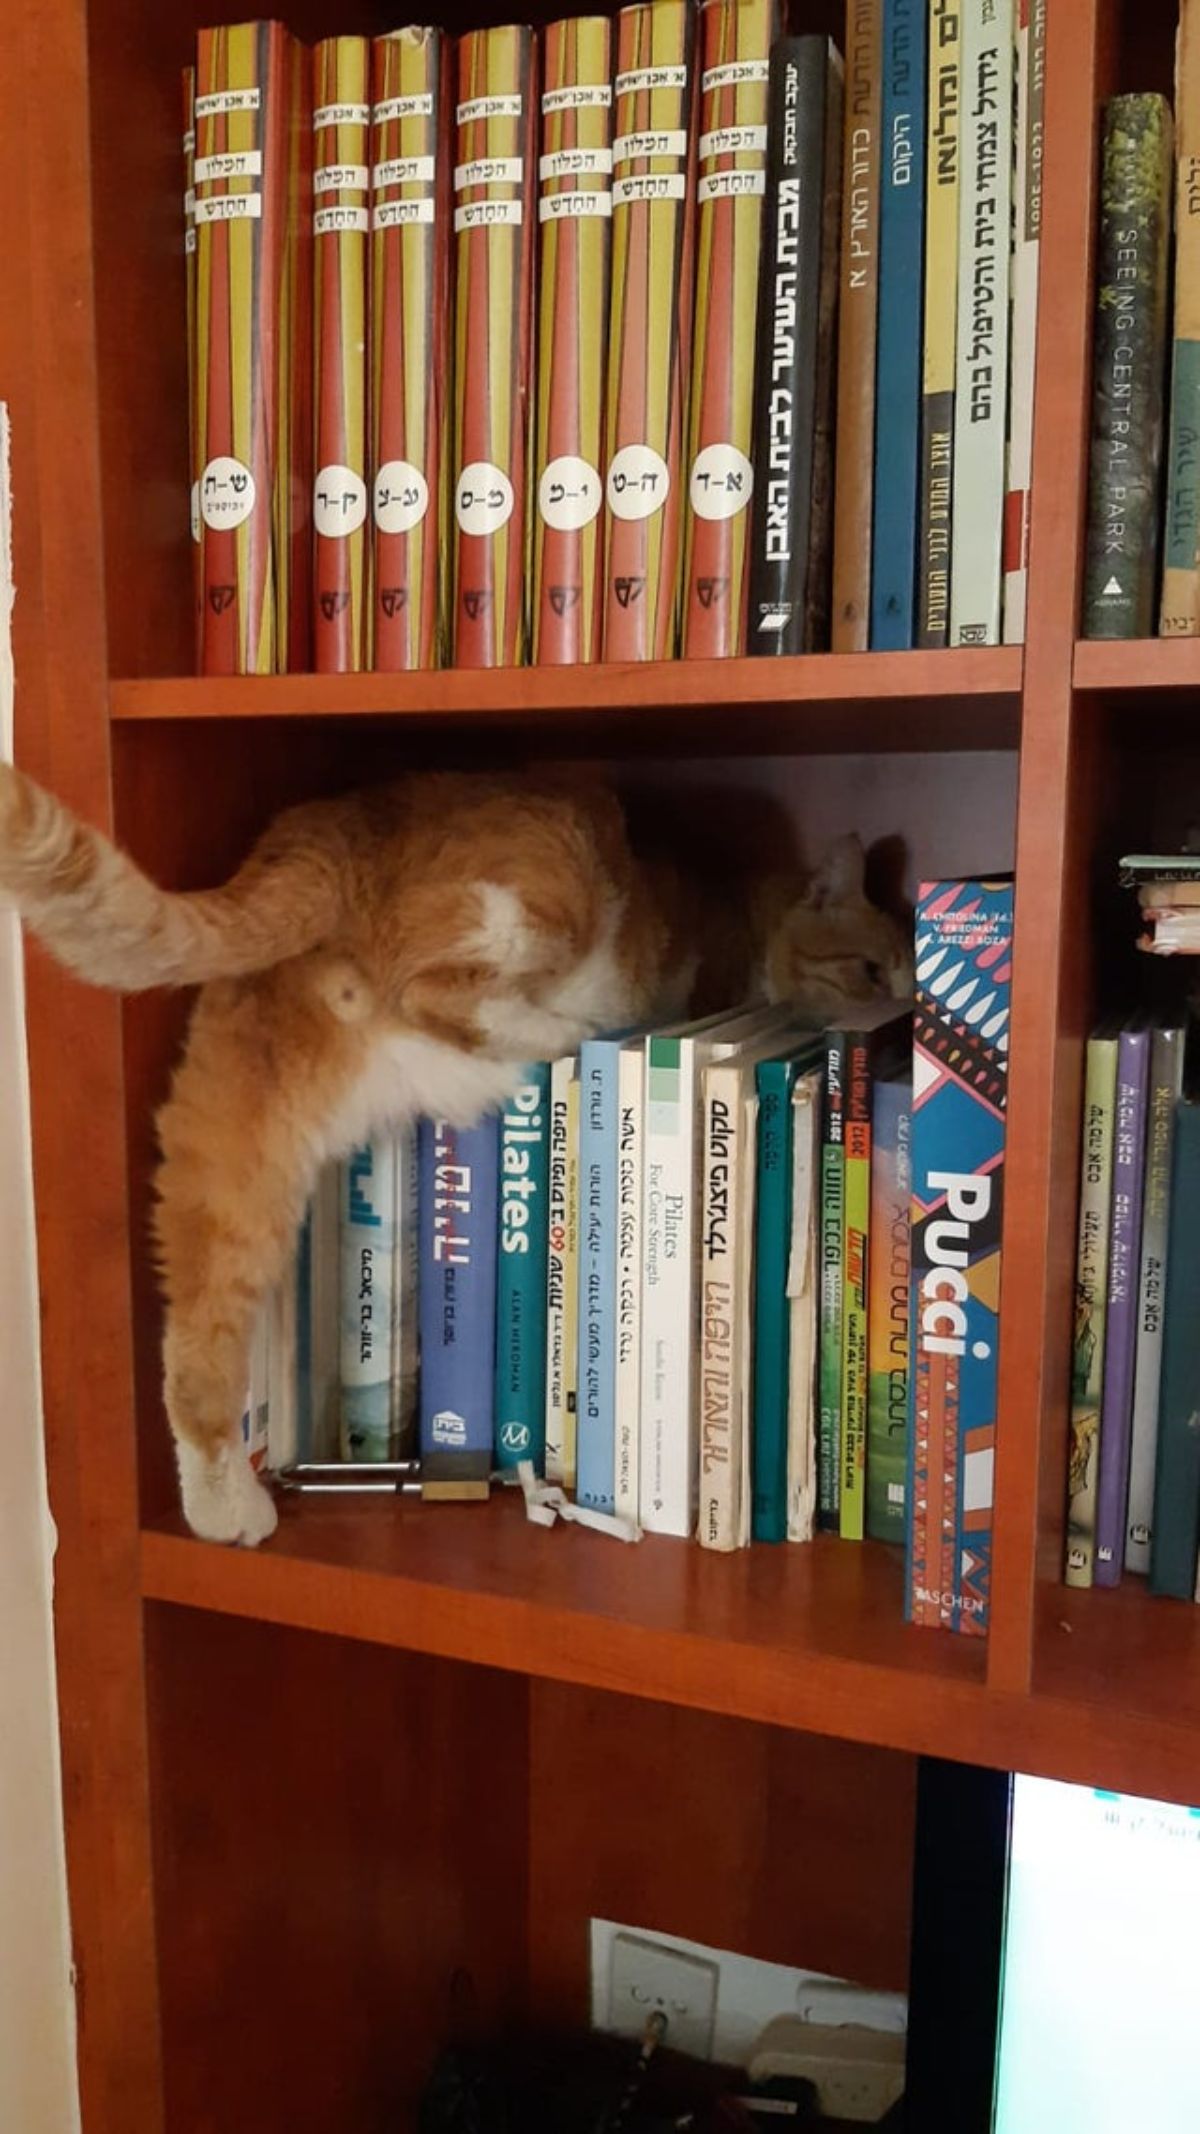 orange and white cat on books in a brown shelf